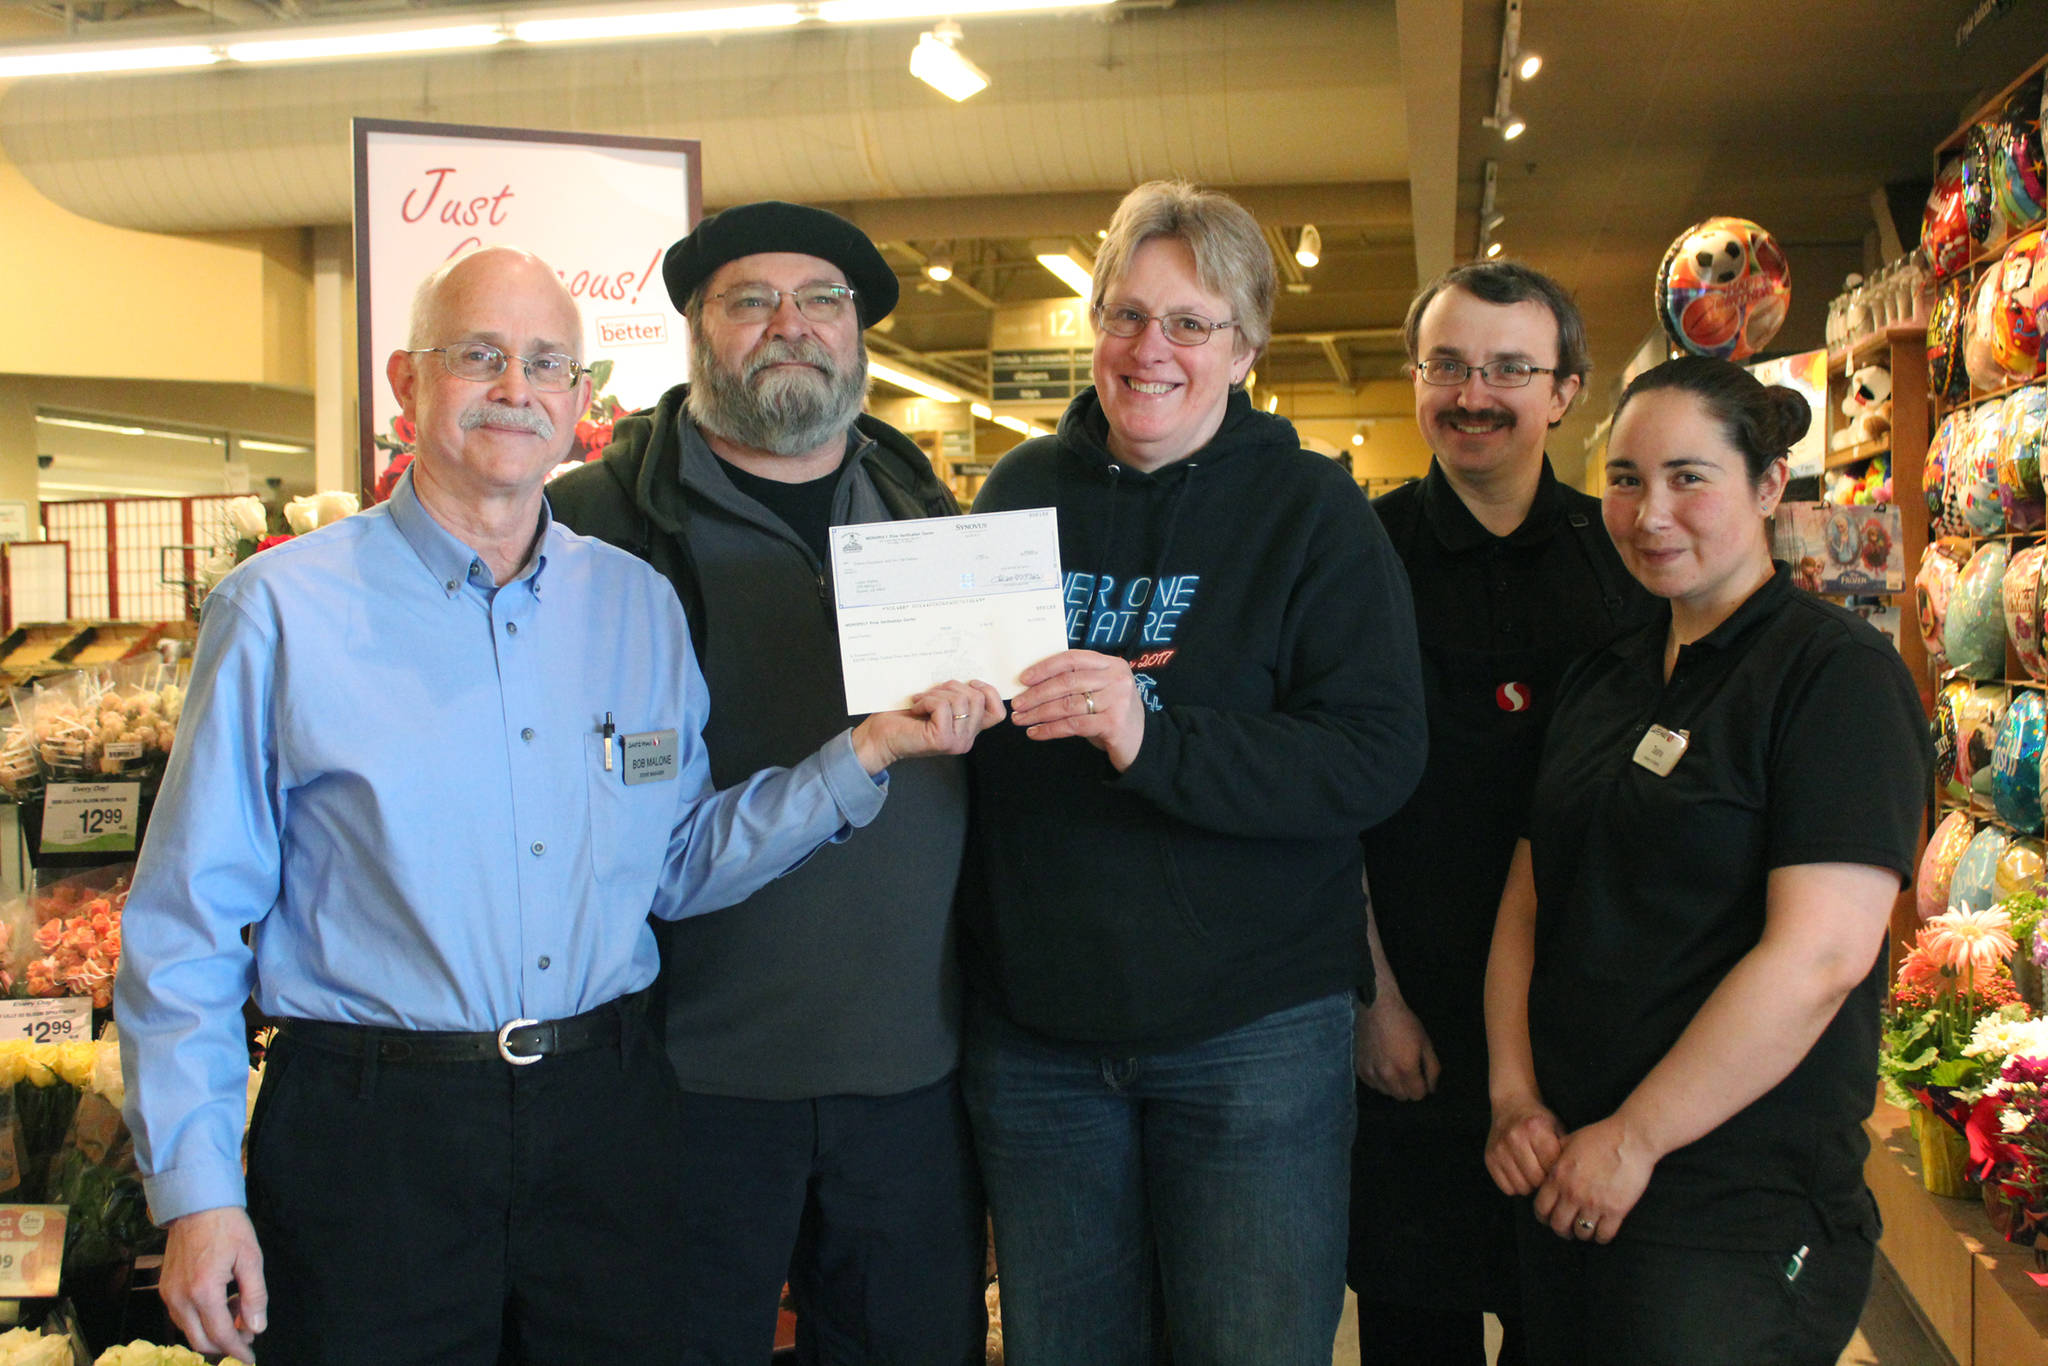 From left to right: Homer Safeway Store Manager Bob Malone, Peter Norton, Laura Norton, Chris Long and Tasha Taylor pose with a check being presented to Laura Norton on Tuesday, May 22, 2018 at the grocery store in Homer, Alaska. Norton won $20,000 through the Safeway Monopoly Game. (Photo by Megan Pacer/Homer News)